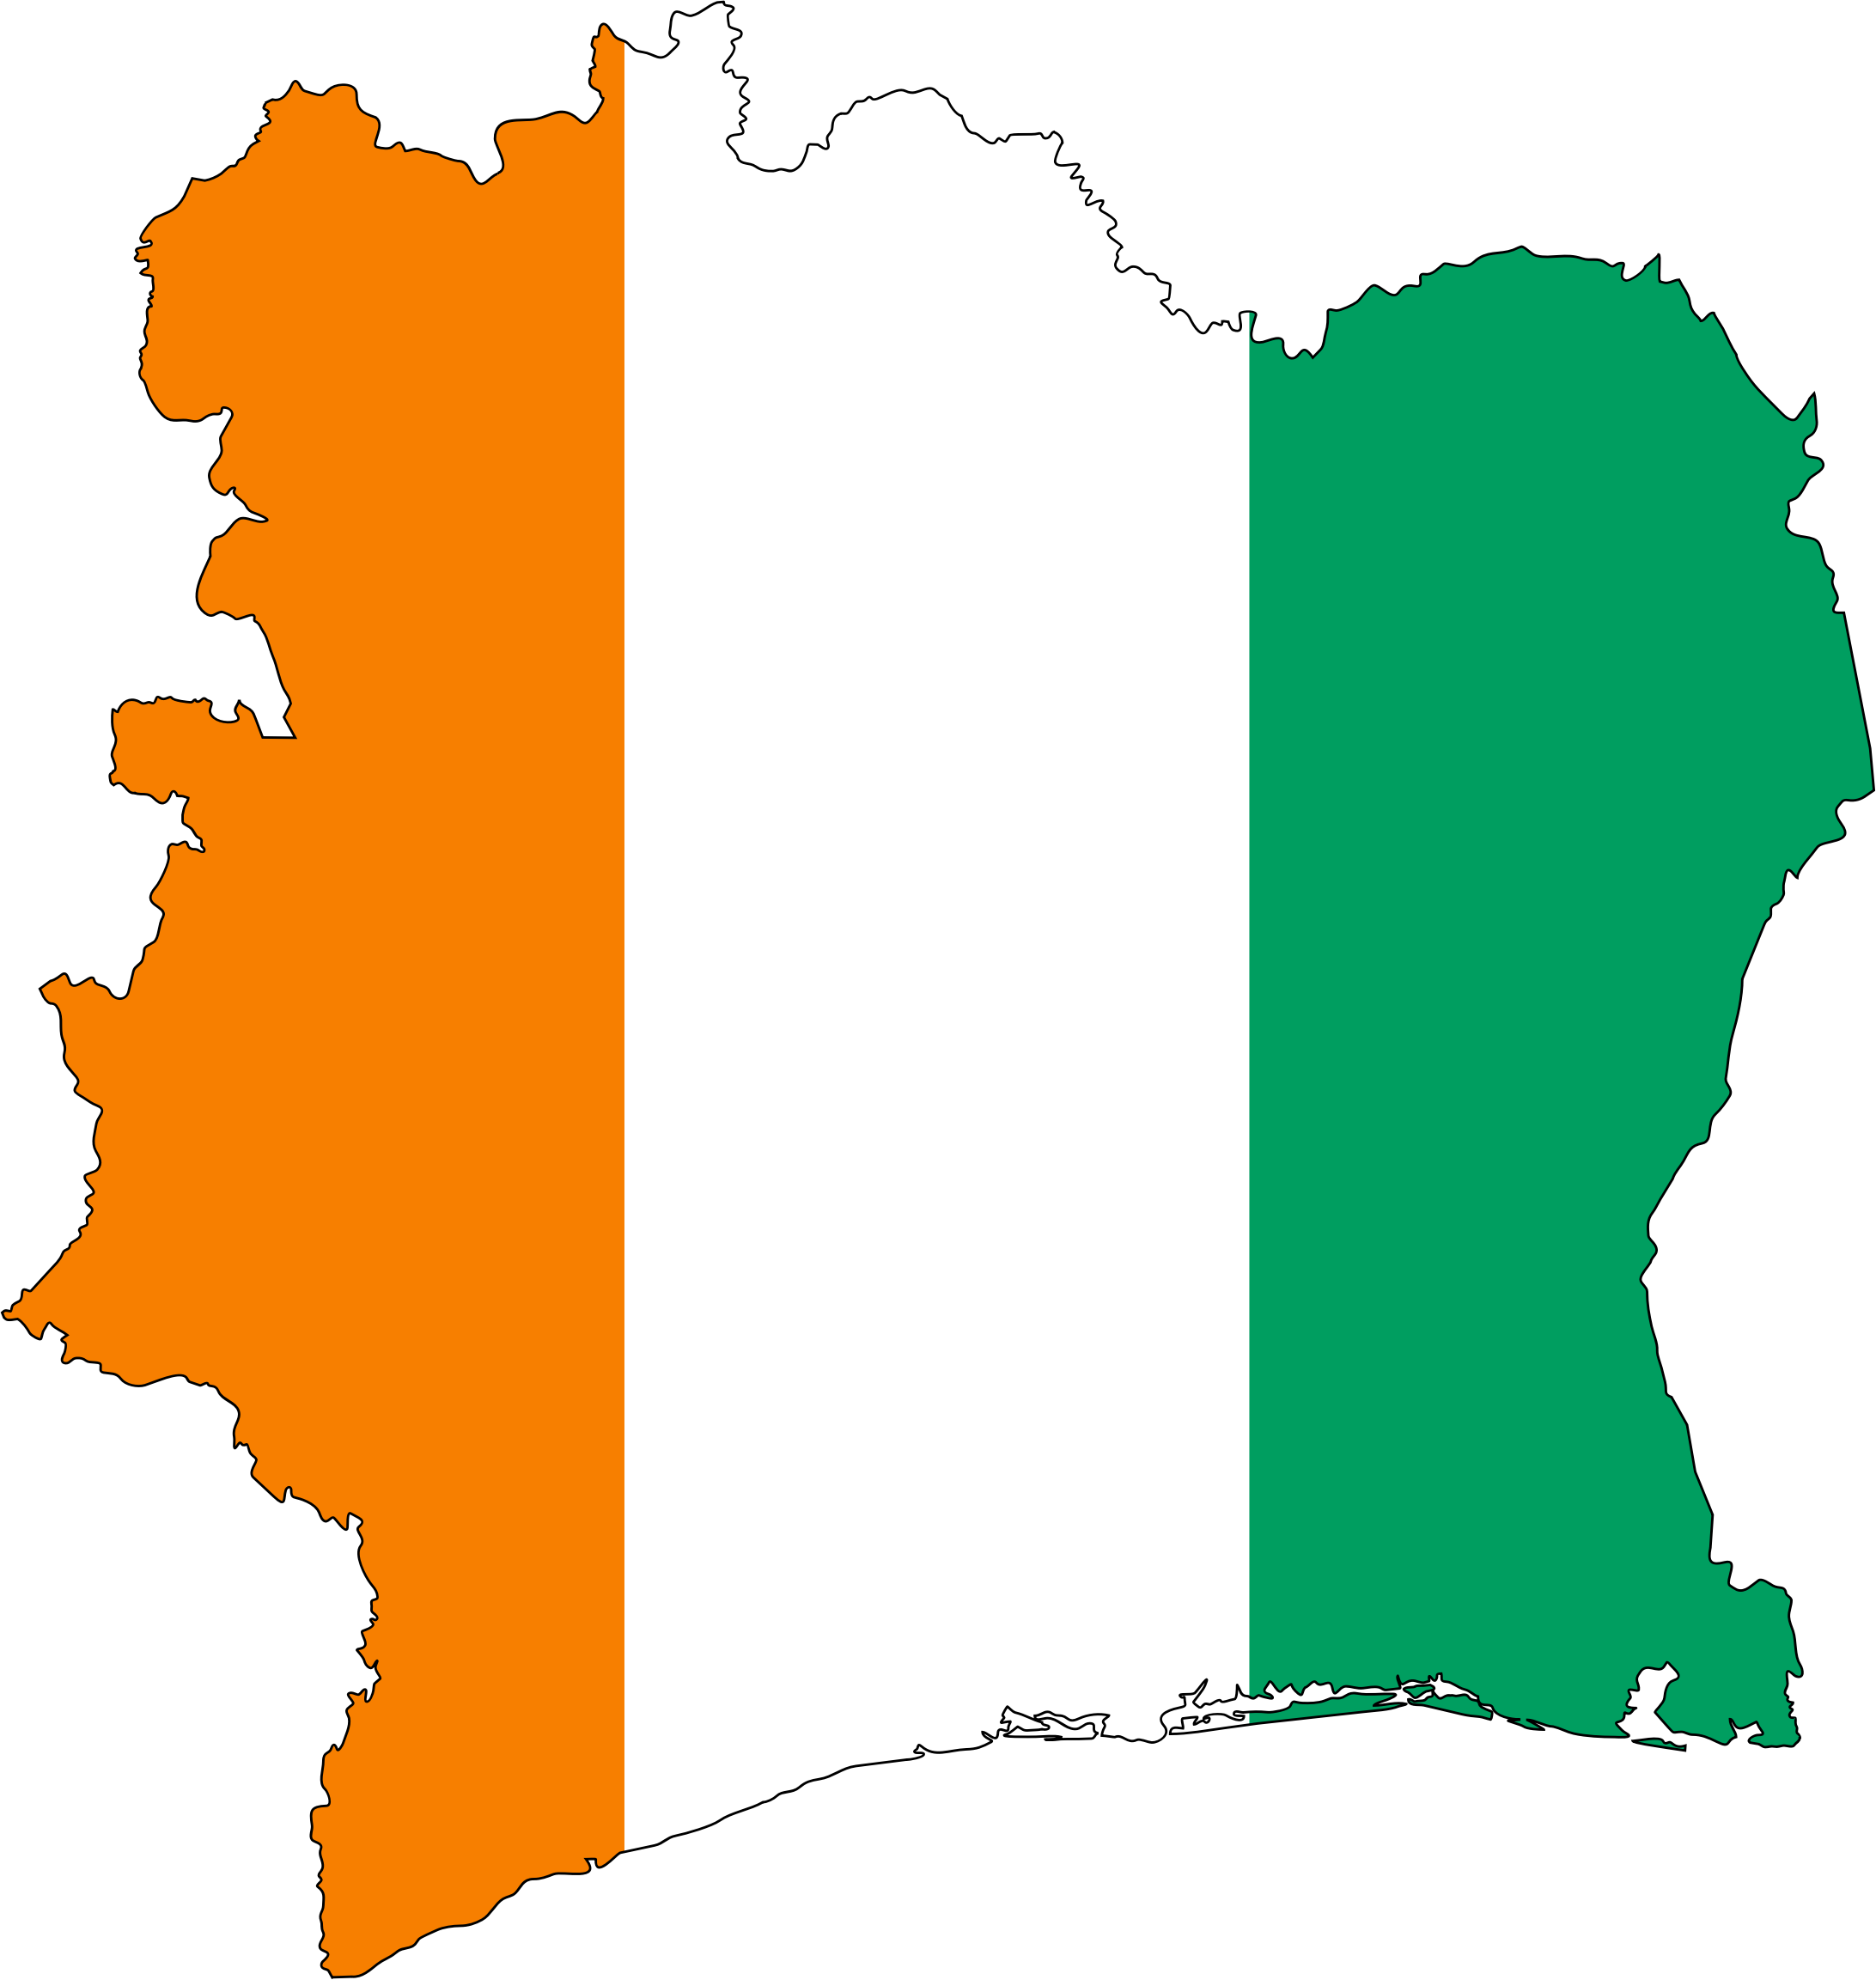 Ivory Coast PM resigns, dissolves gov’t after poll